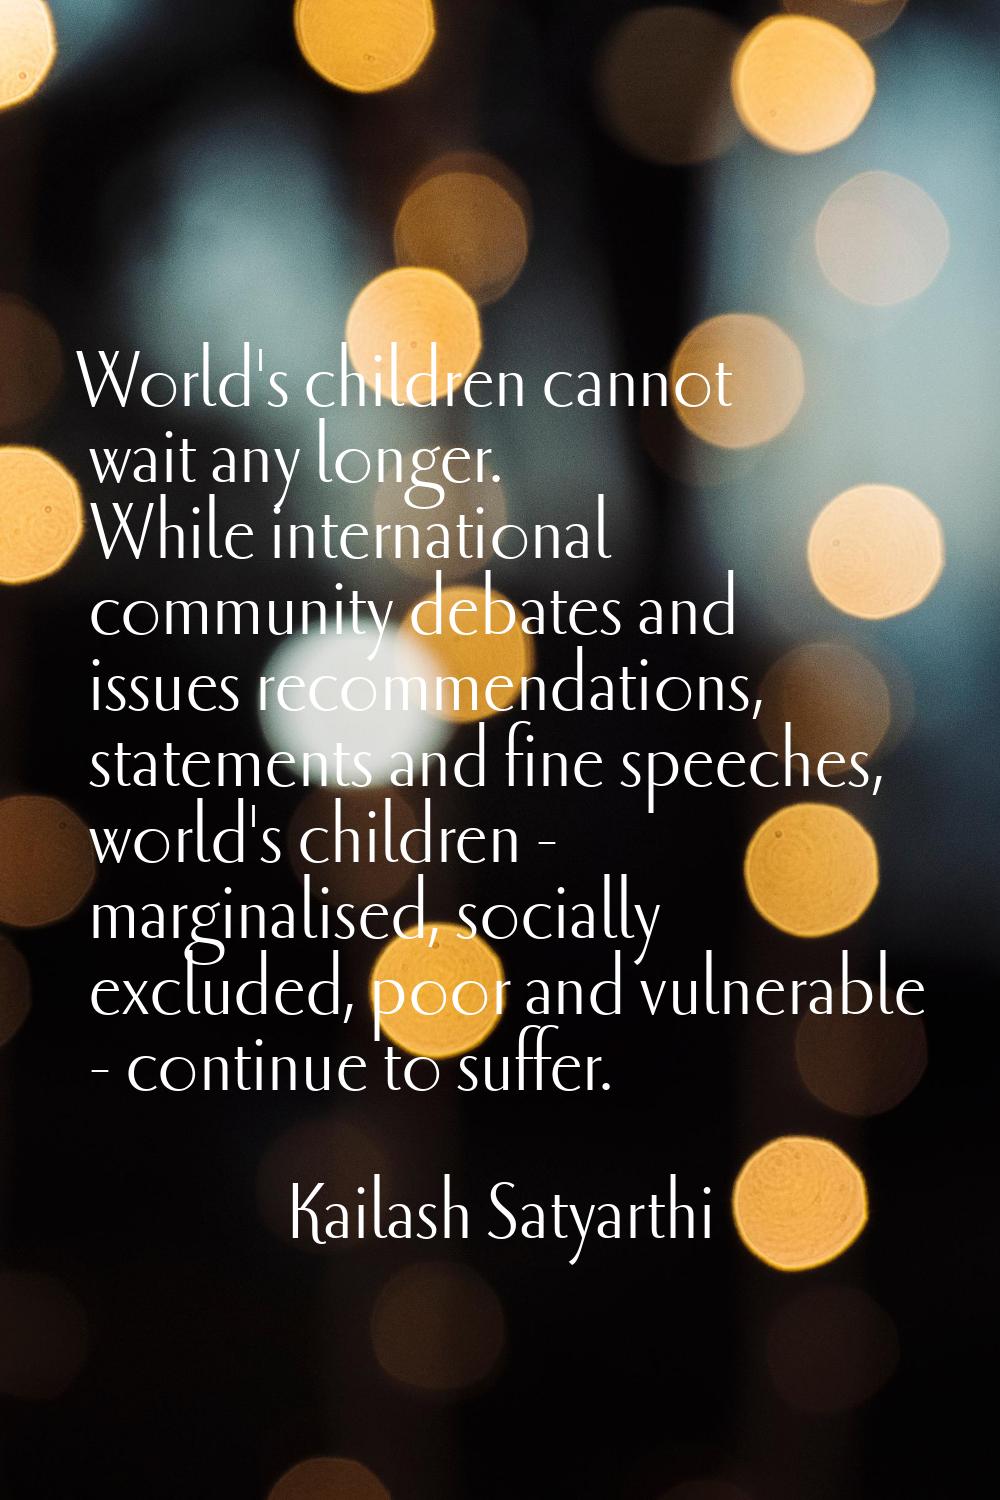 World's children cannot wait any longer. While international community debates and issues recommend